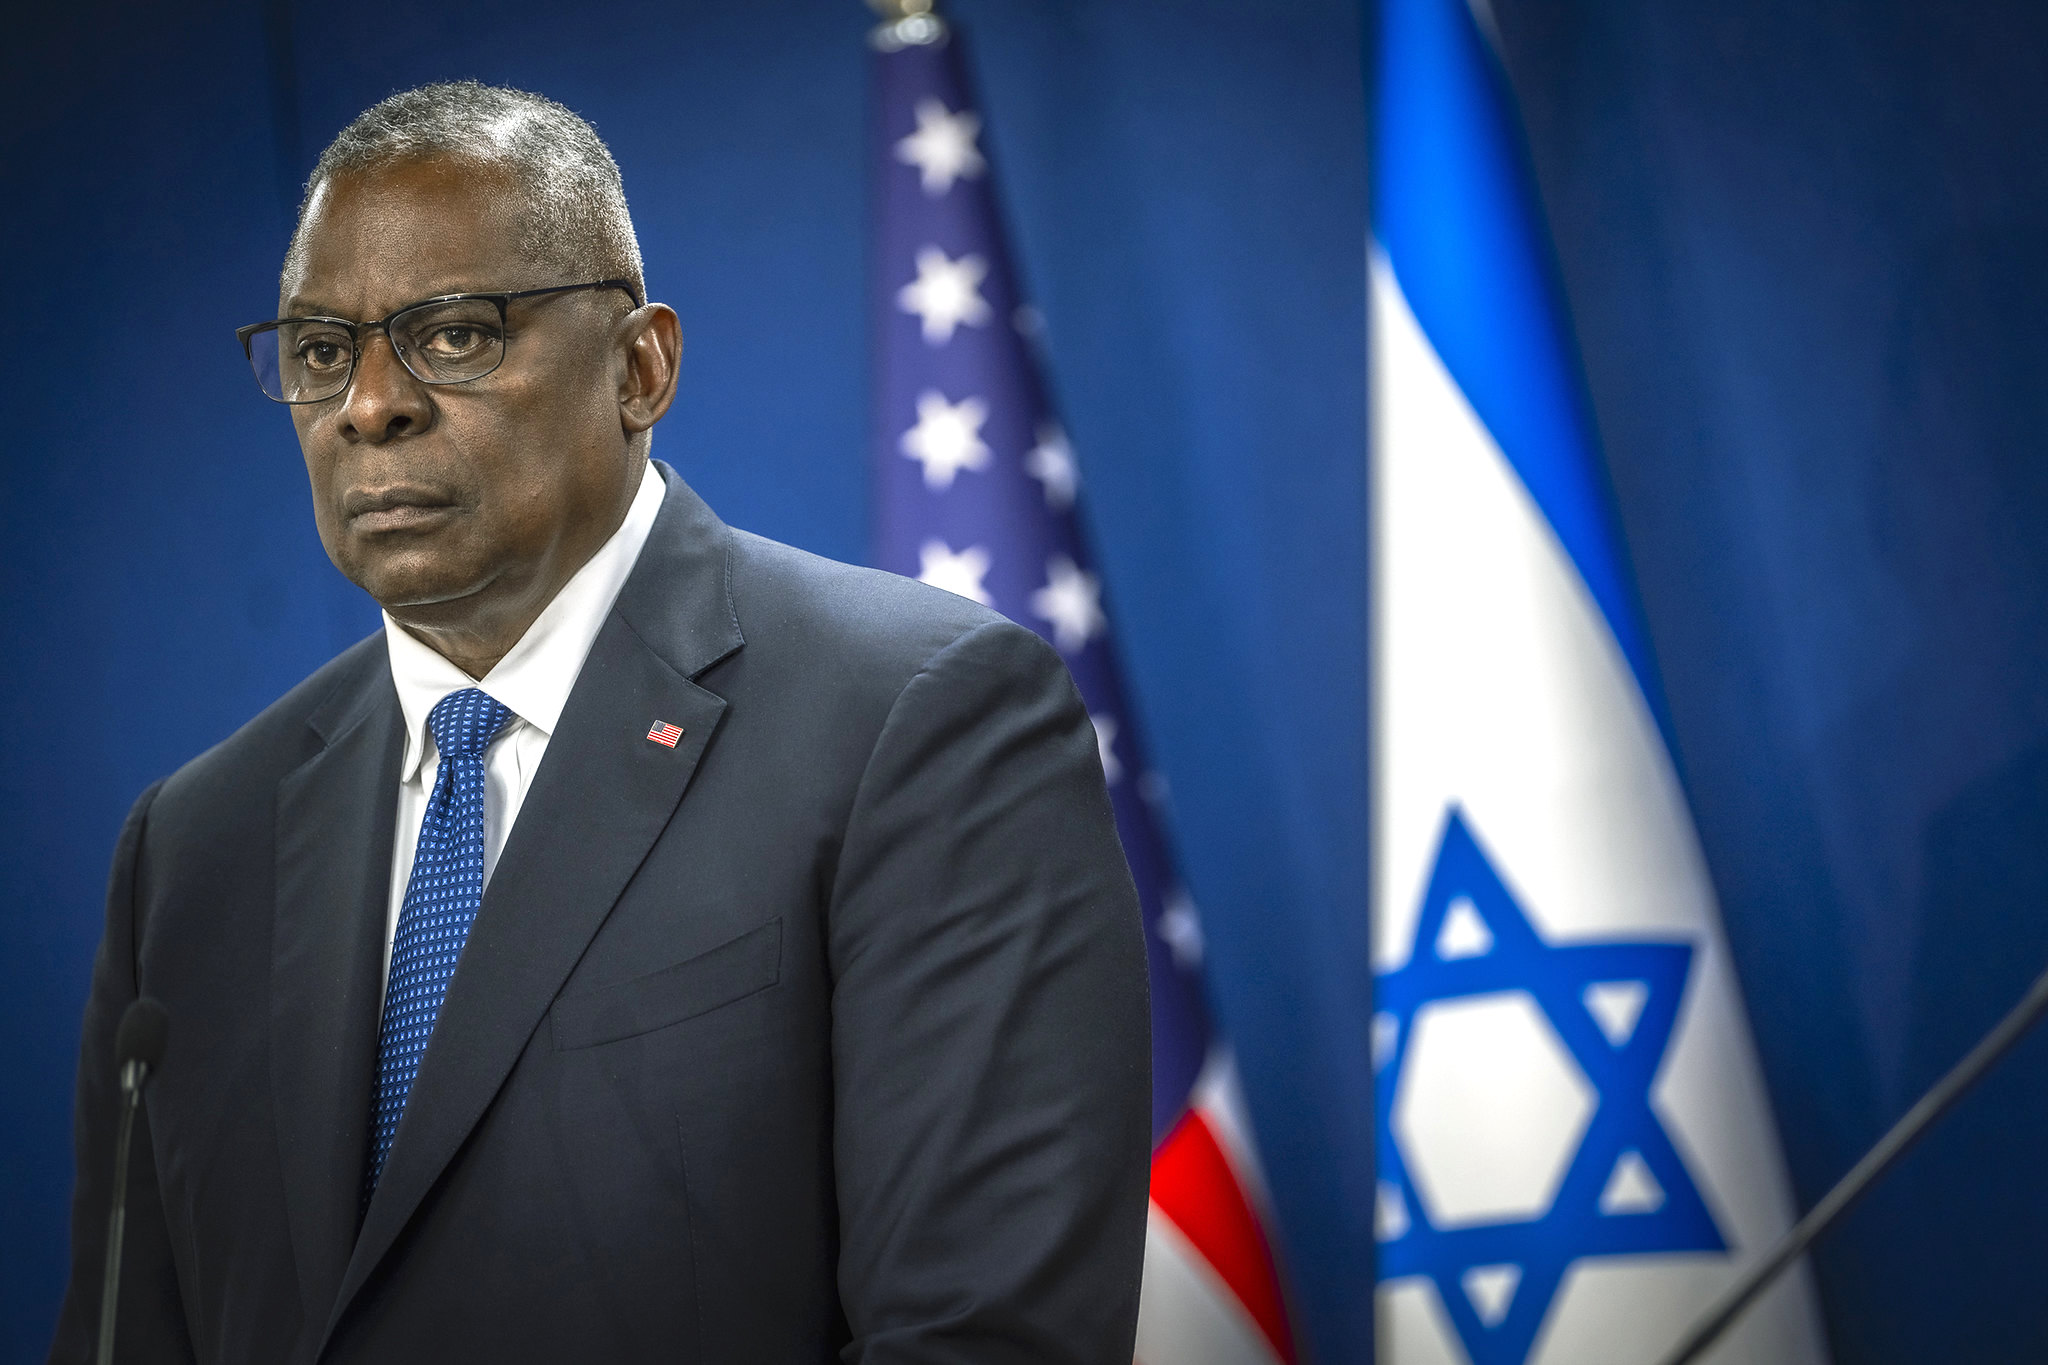 US Secretary of Defense Lloyd Austin on Oct. 13 in Tel Aviv, which he visited to “underscore the unwavering support of the U.S. … to ensuring Israel has what it needs to defend itself.” Photo: Chad J. McNeeley/DoD. 